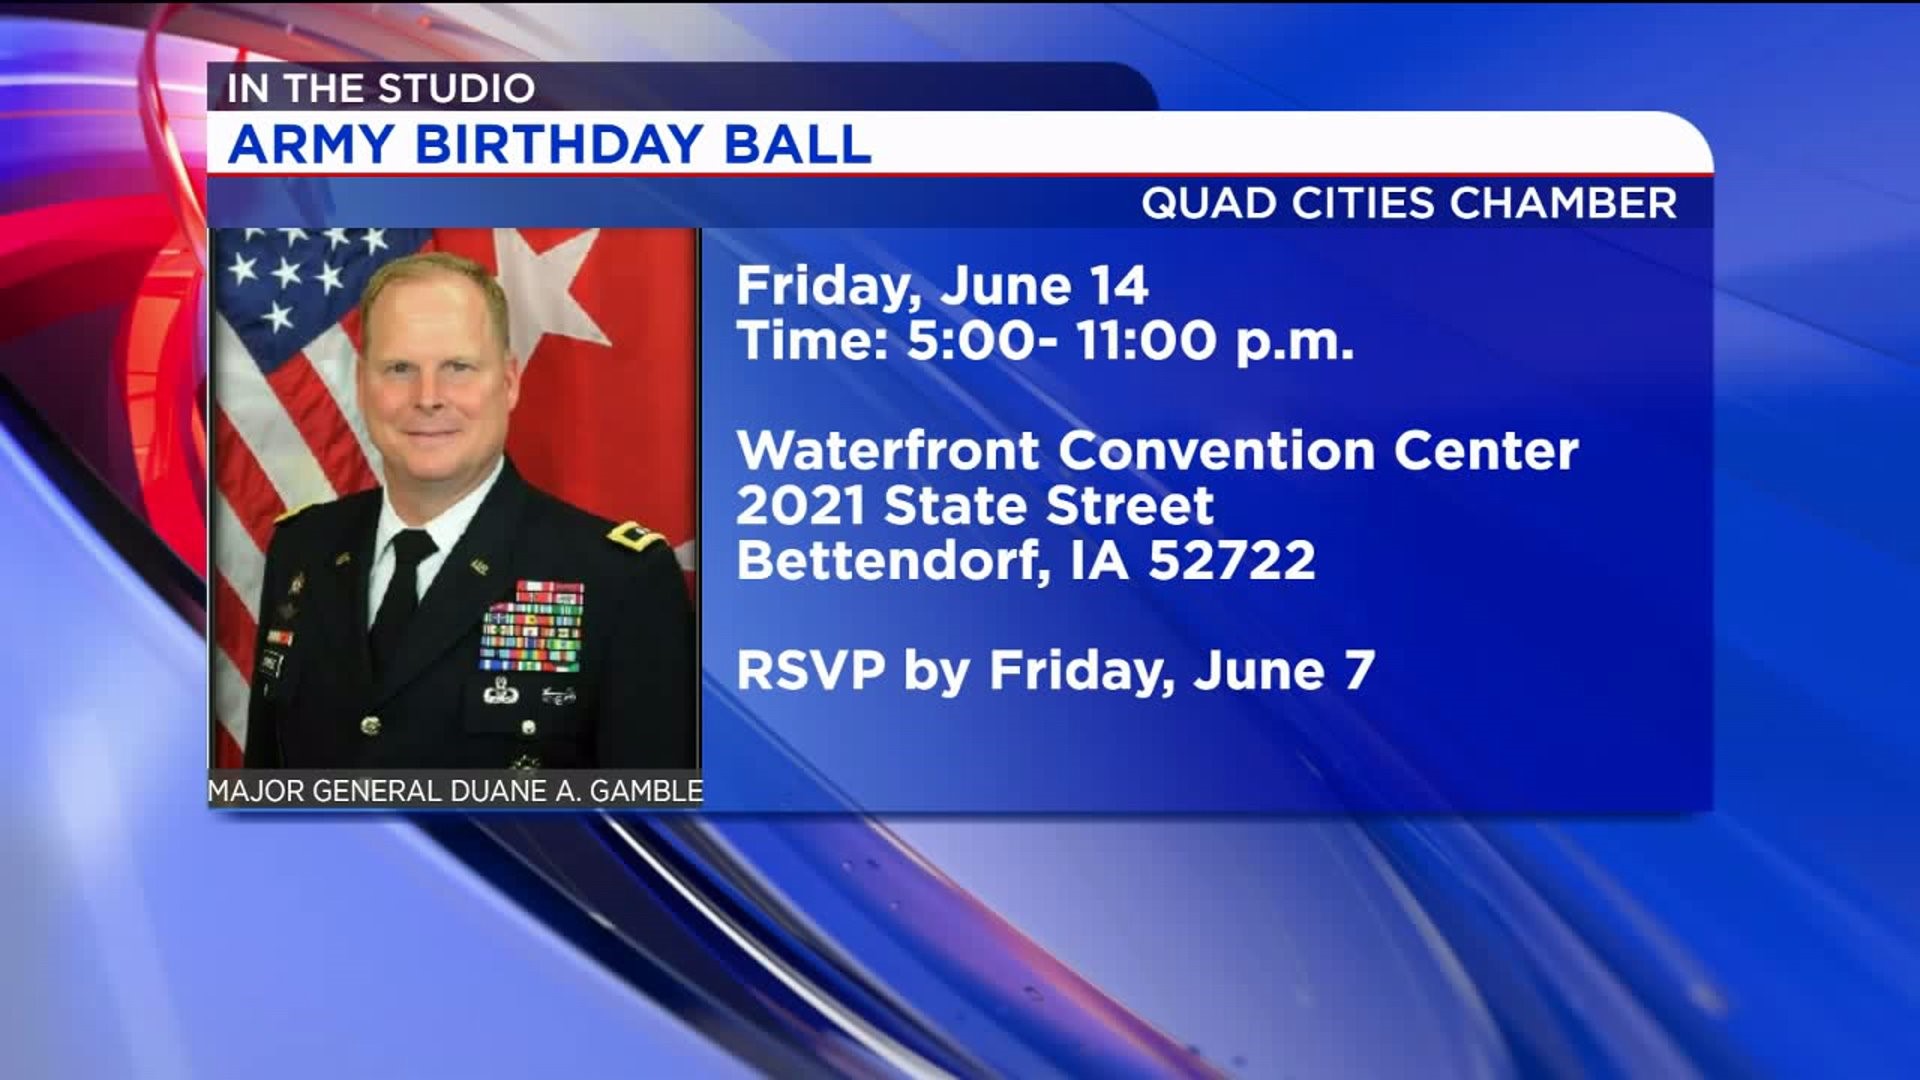 How You Can Support the Military: Army Birthday Ball